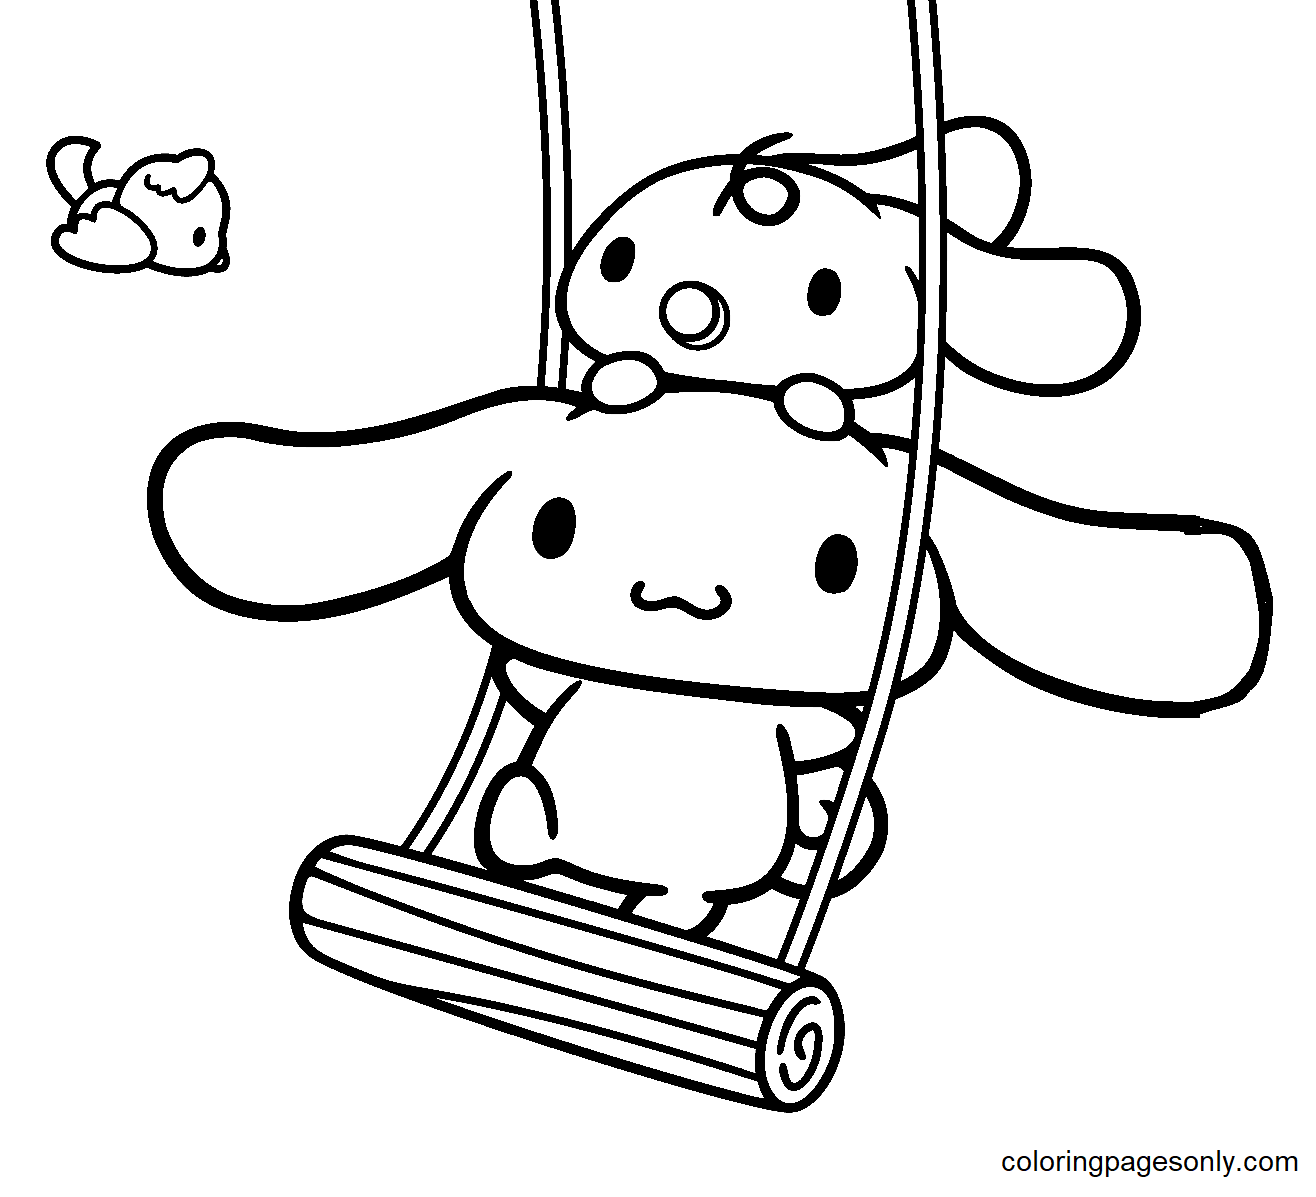 Cinnamoroll coloring pages